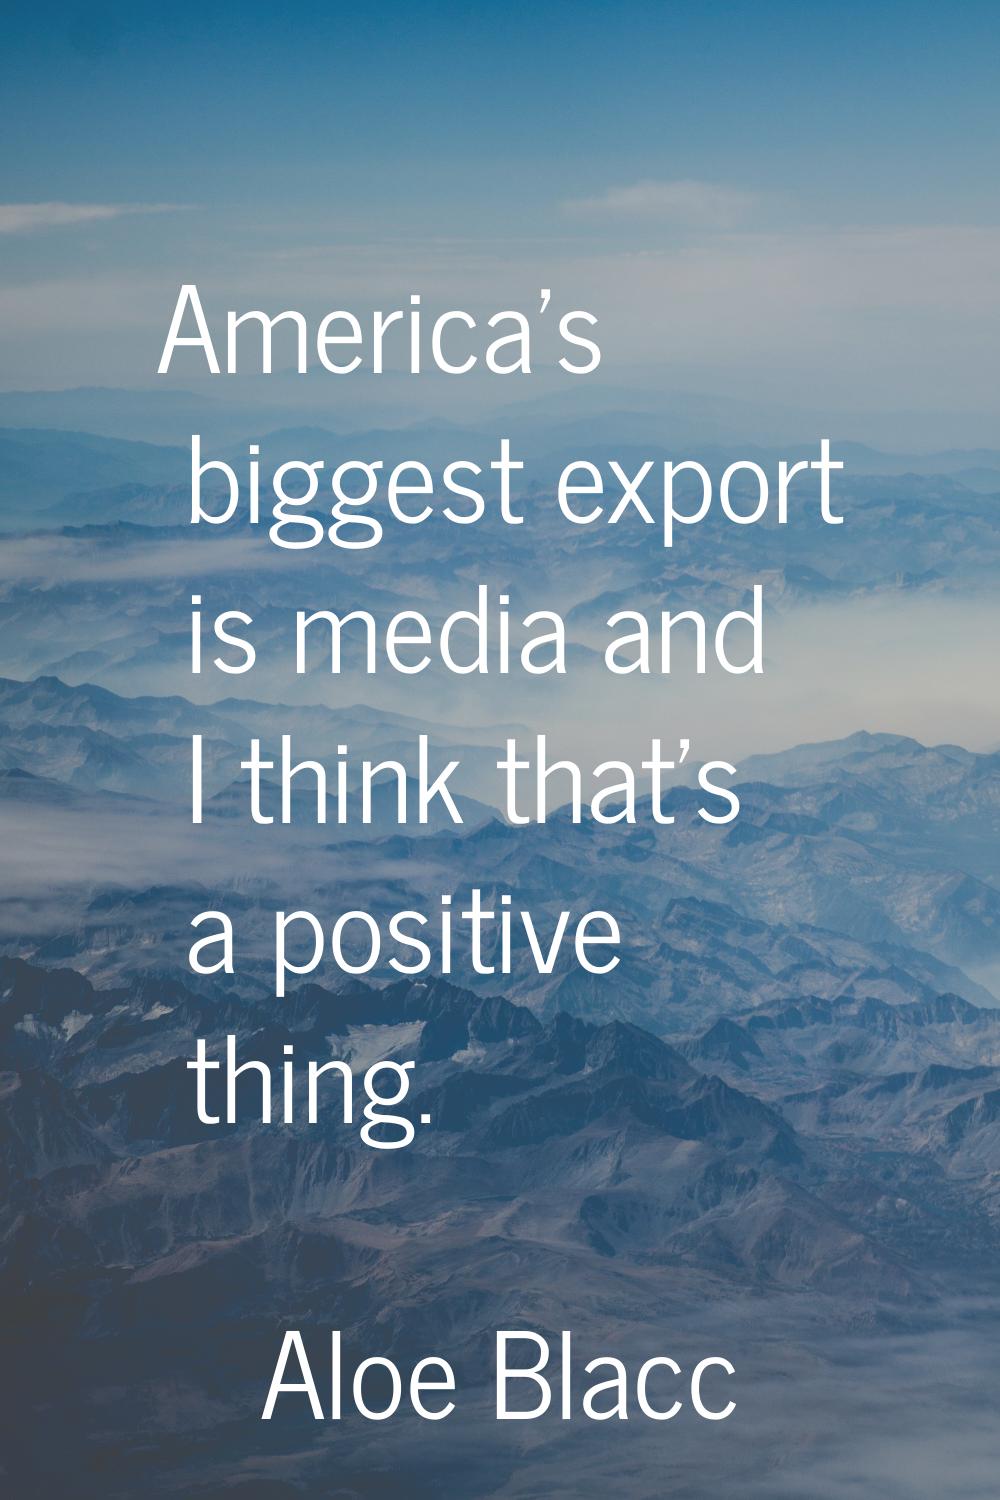 America's biggest export is media and I think that's a positive thing.